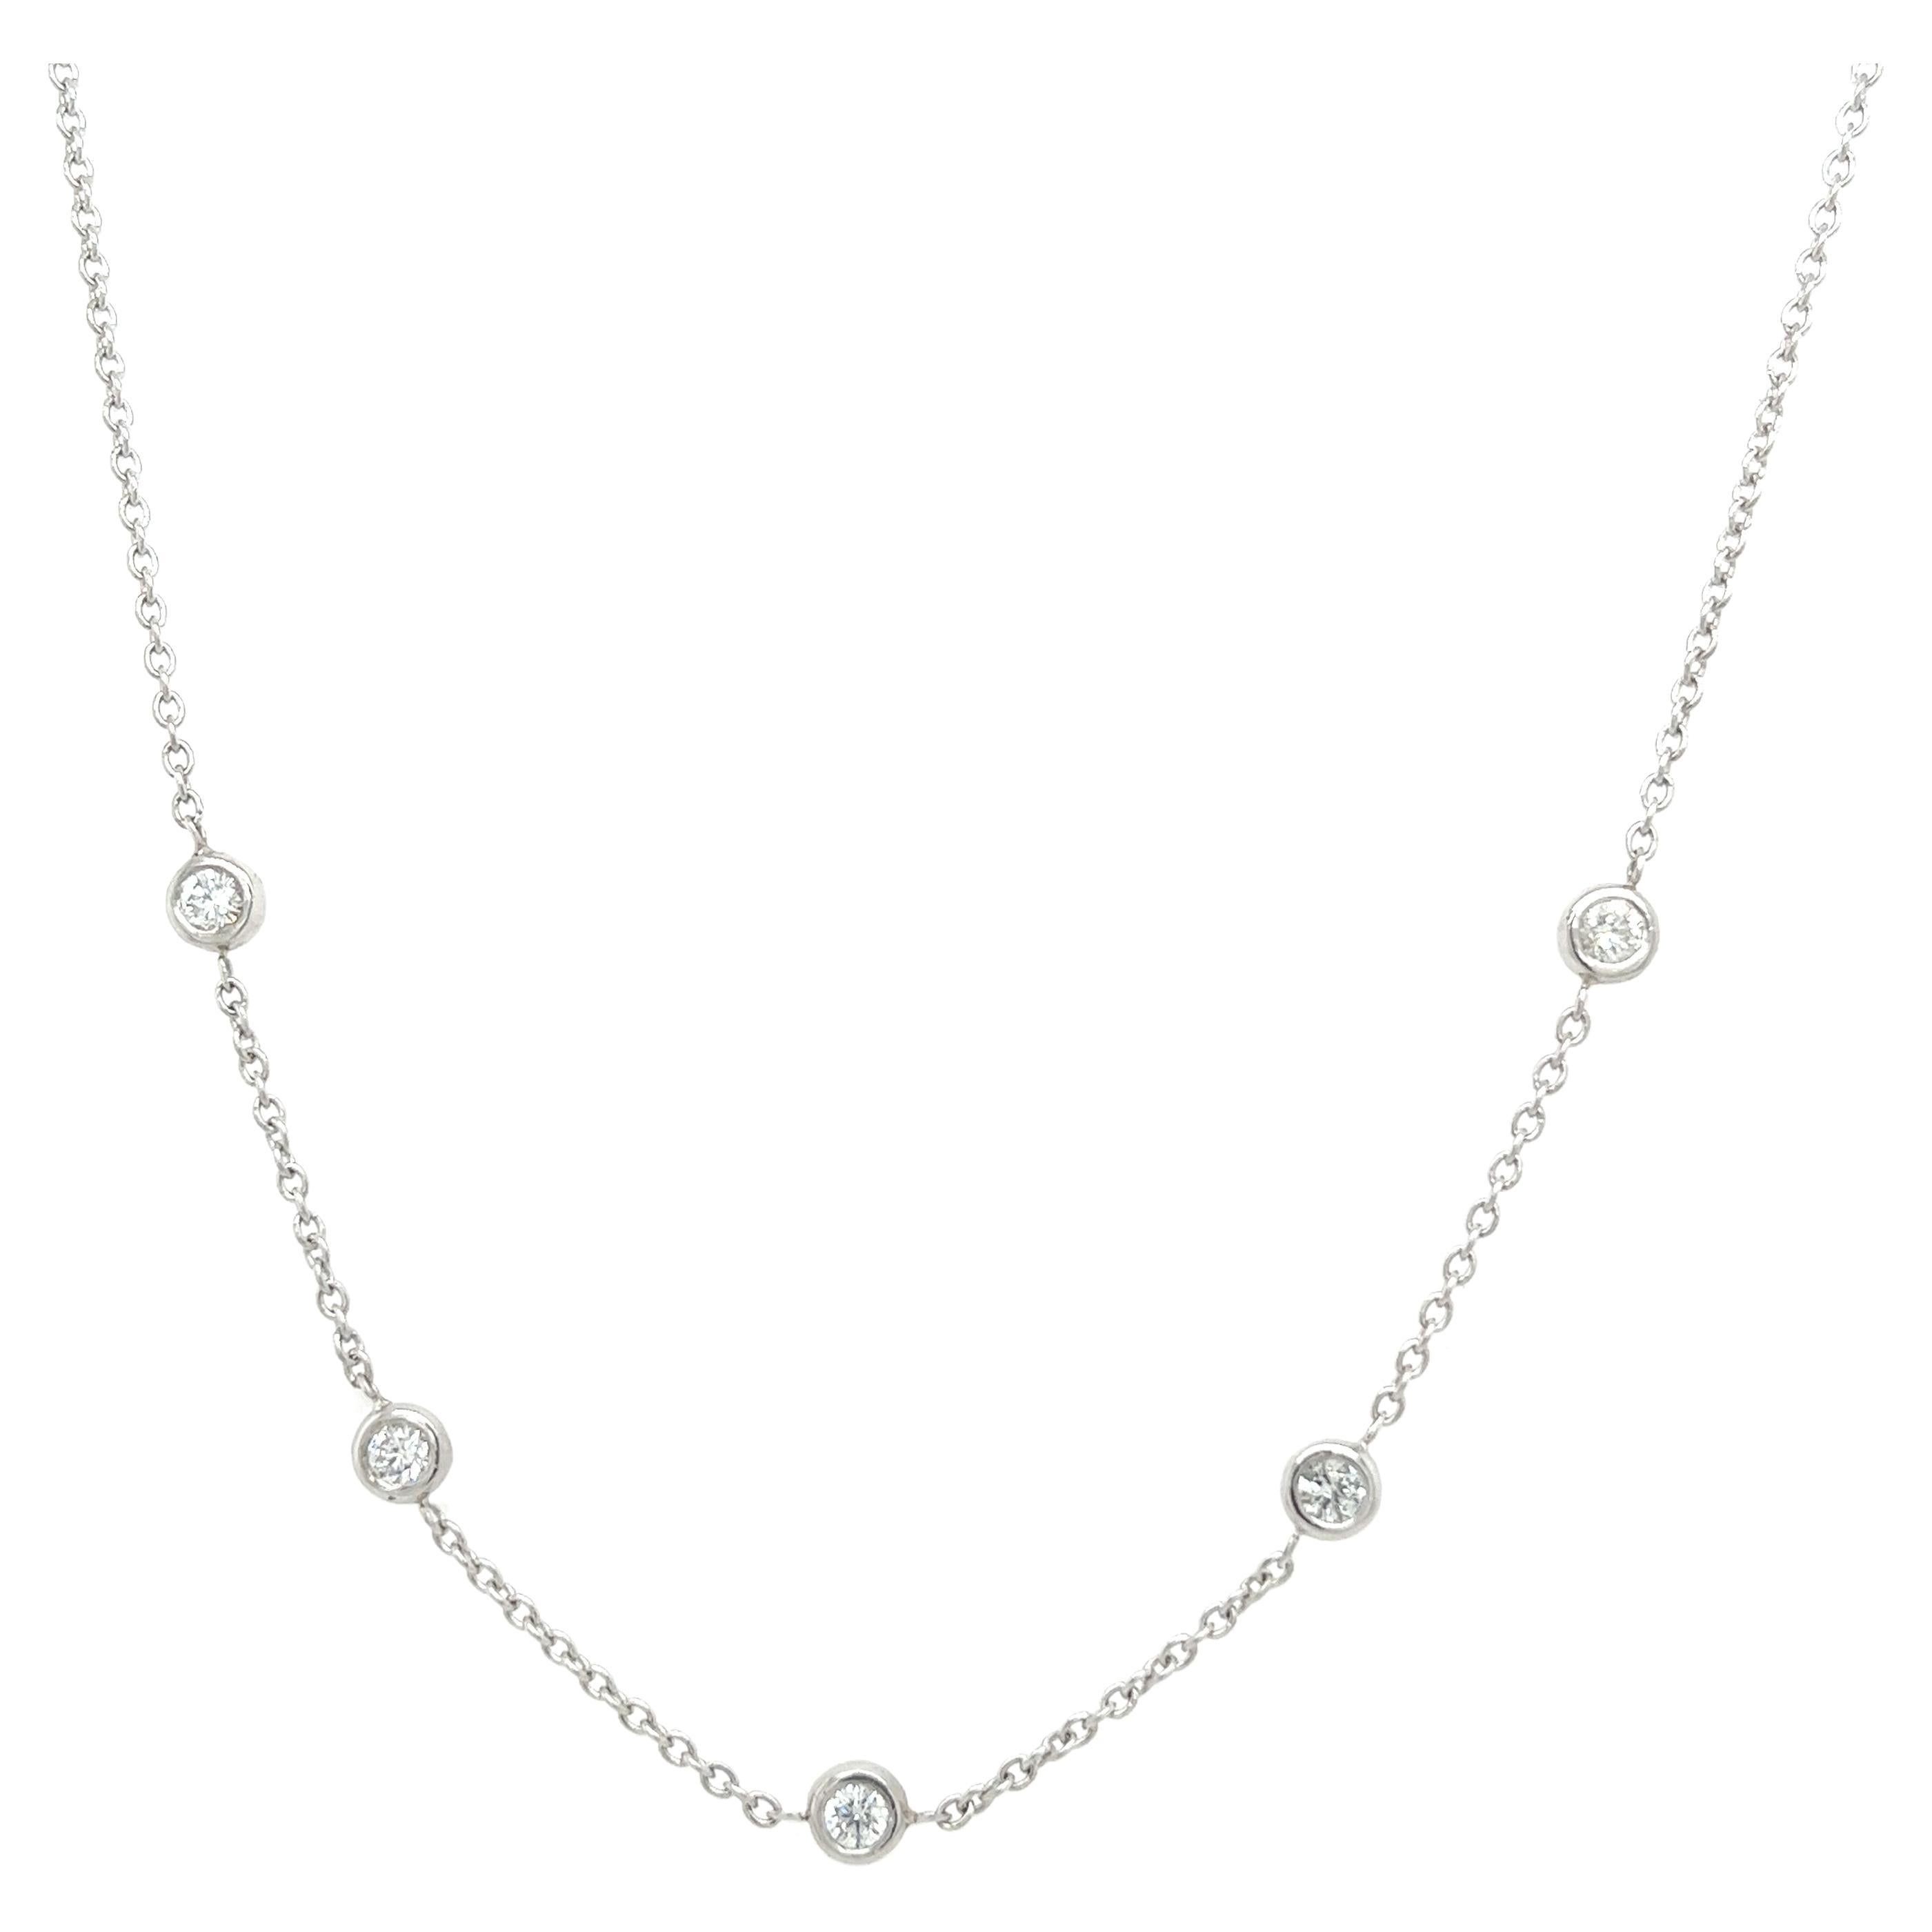 New 5-Stone Diamond Set Necklace with 0.40ct of Diamonds in 14ct White Gold